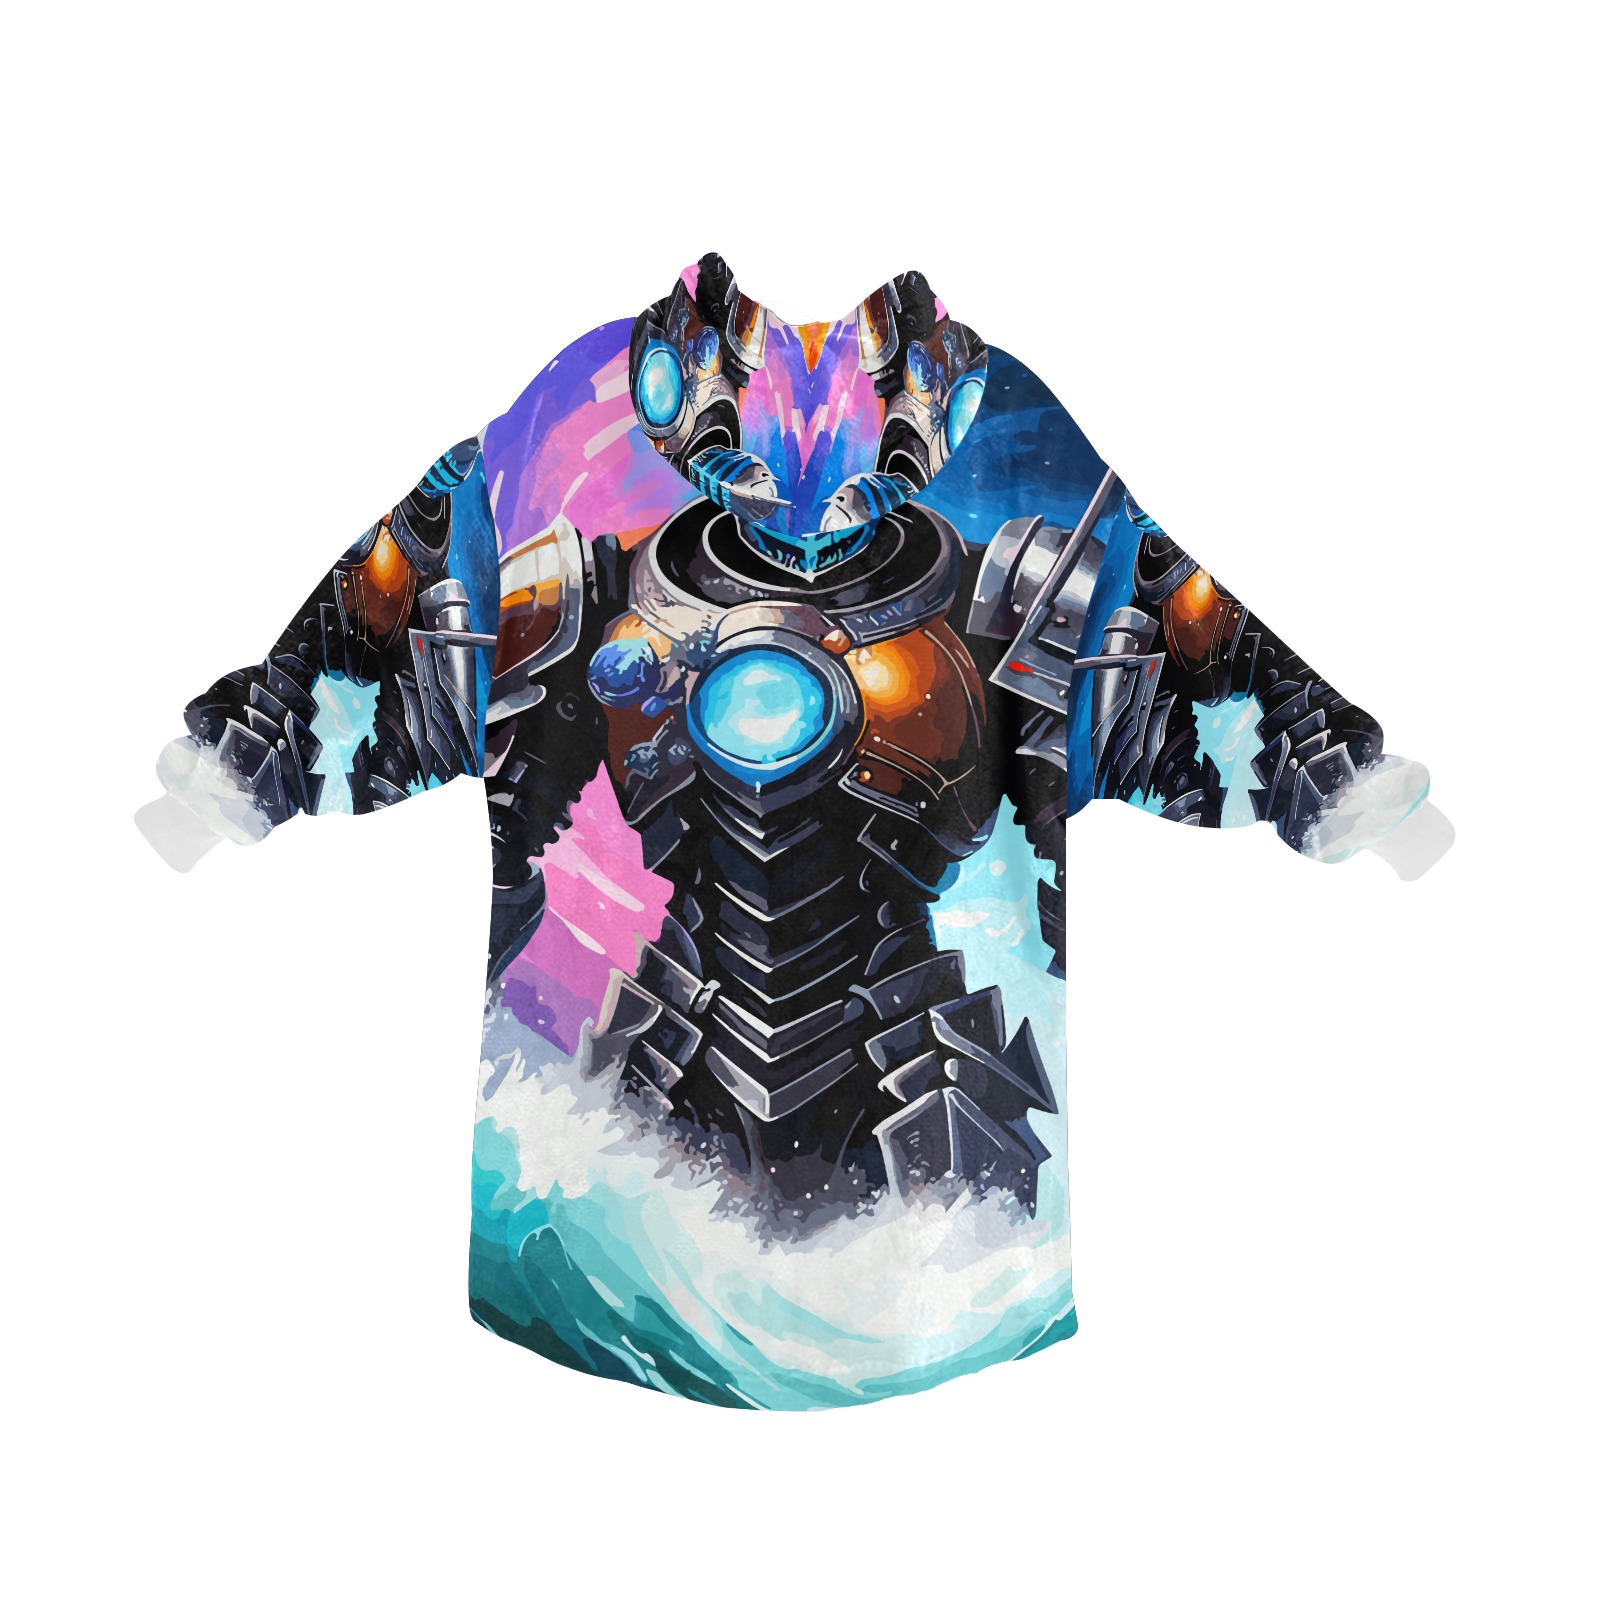 Fantasy robotic knight rises from the ocean waves Blanket Hoodie for Men